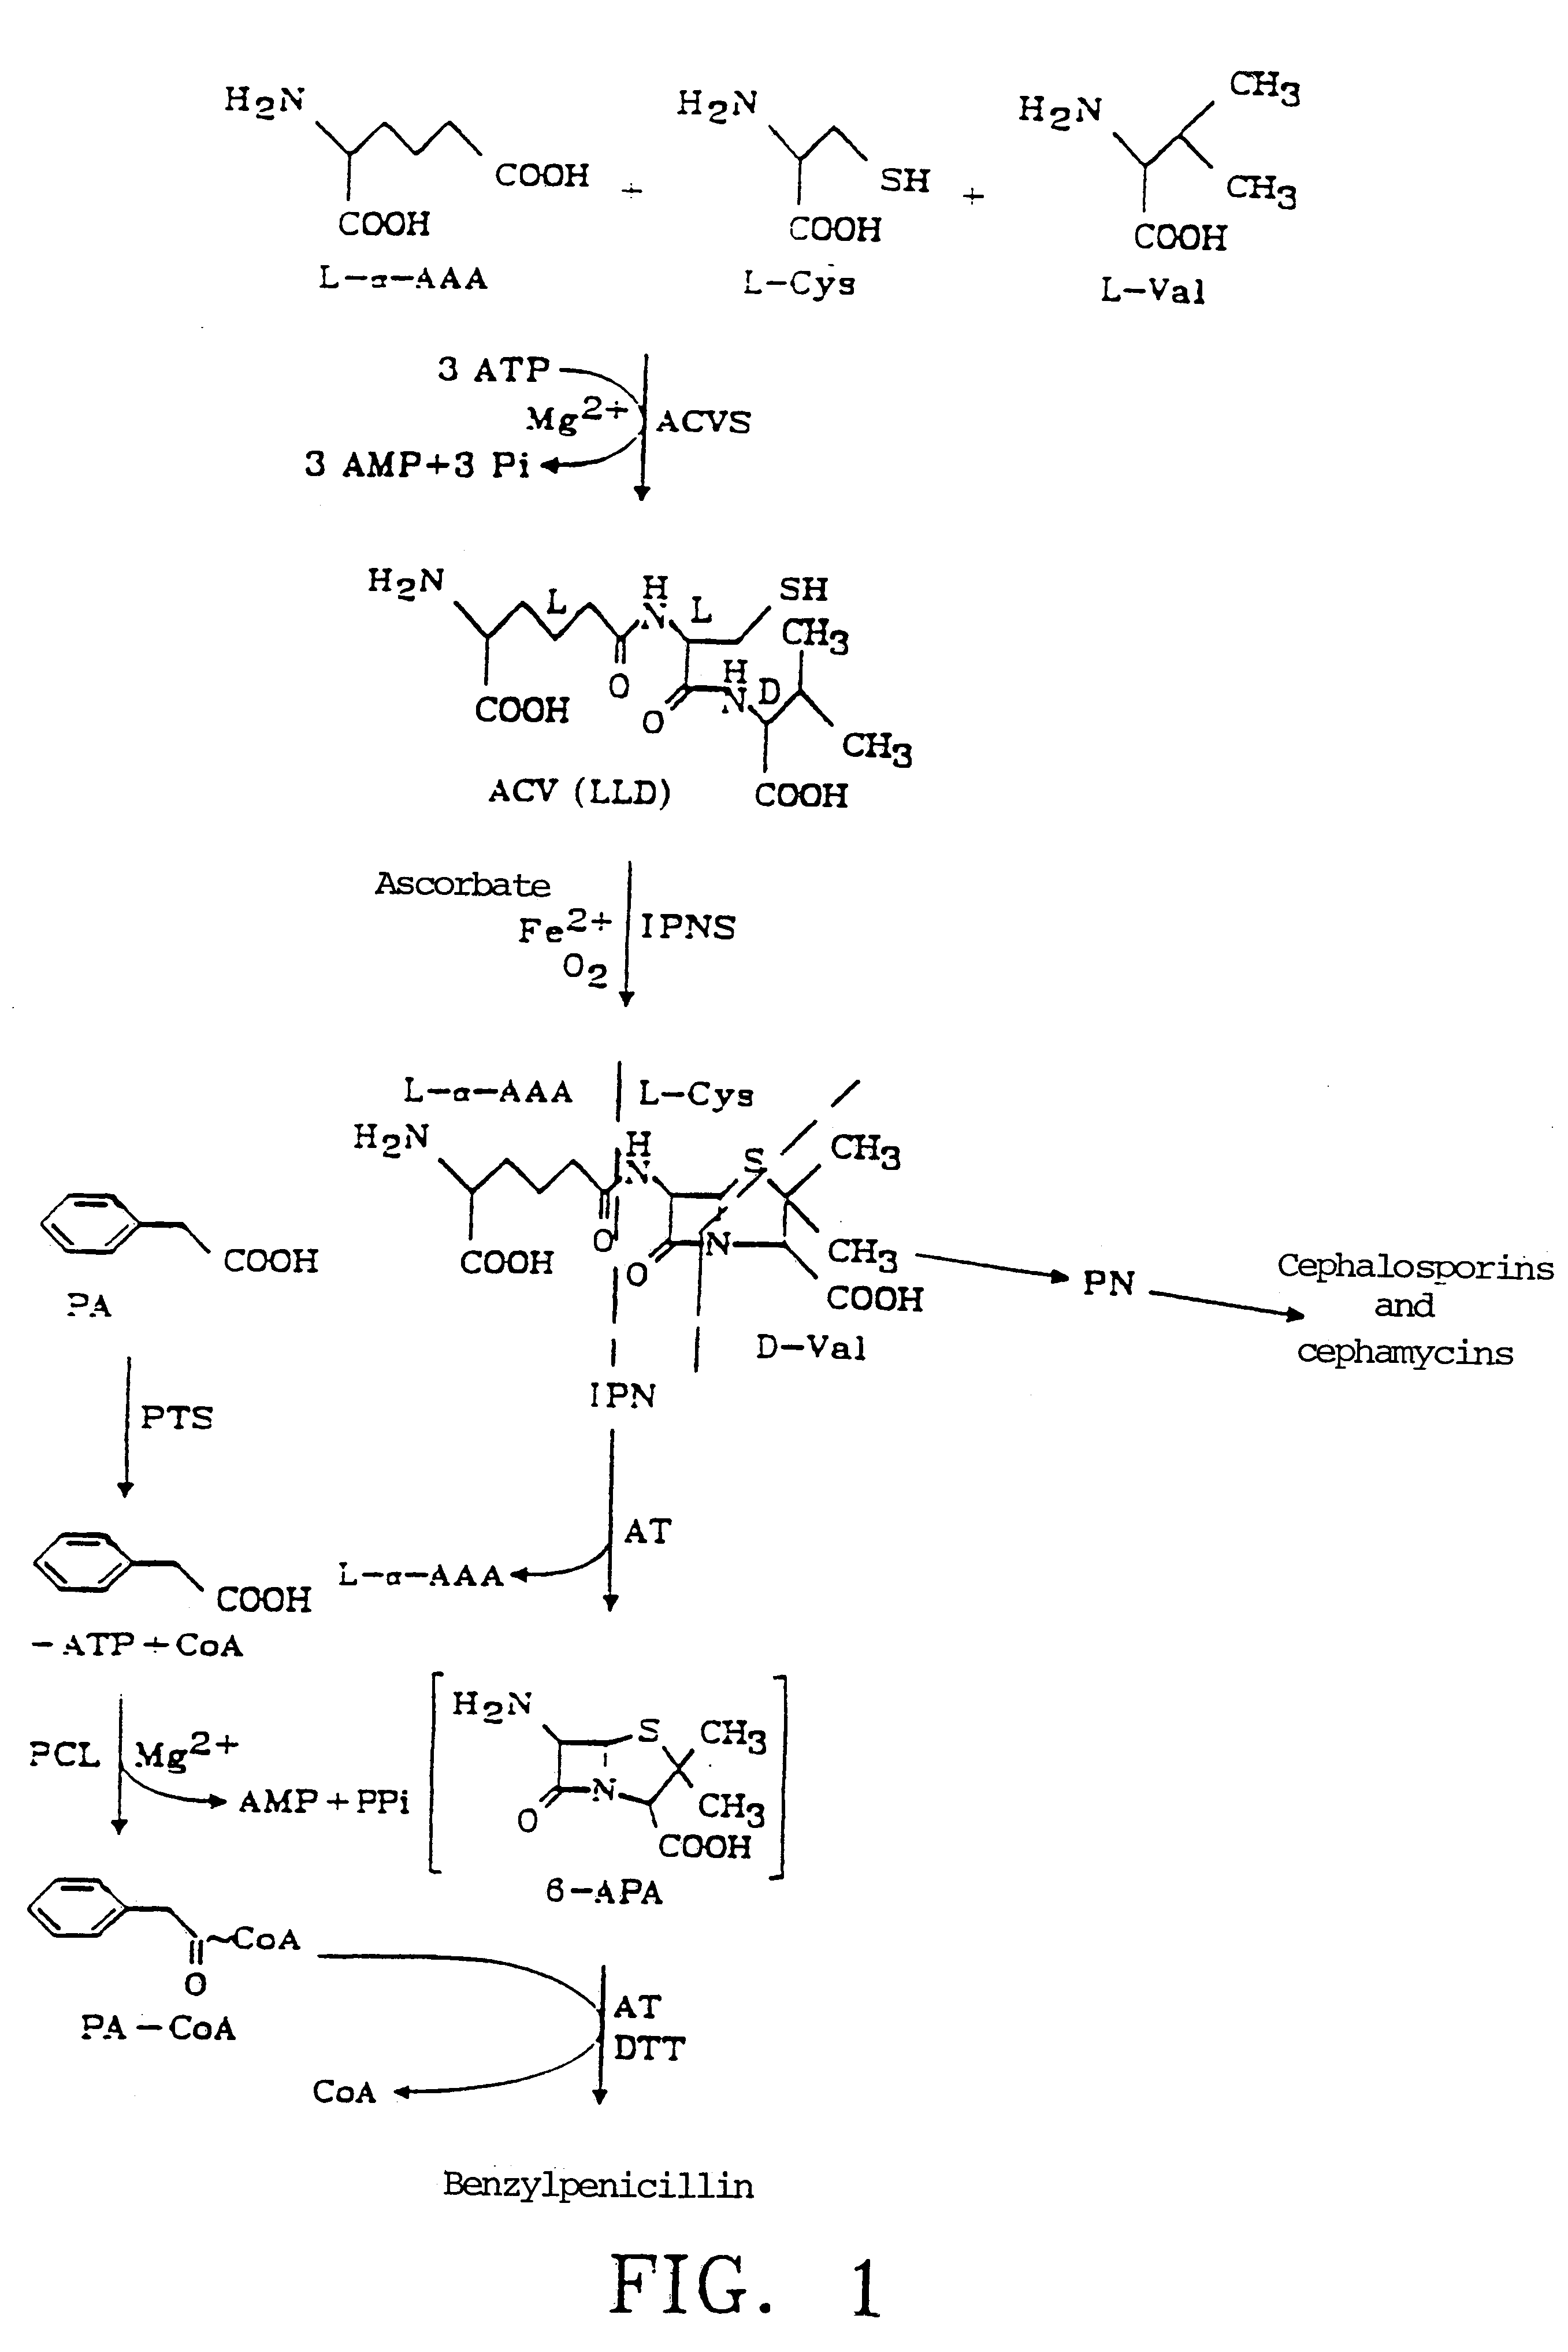 Process for increasing the production of penicillin G (benzylpenicillin) in Penicillium chrysogenum by expression of the PCL gene